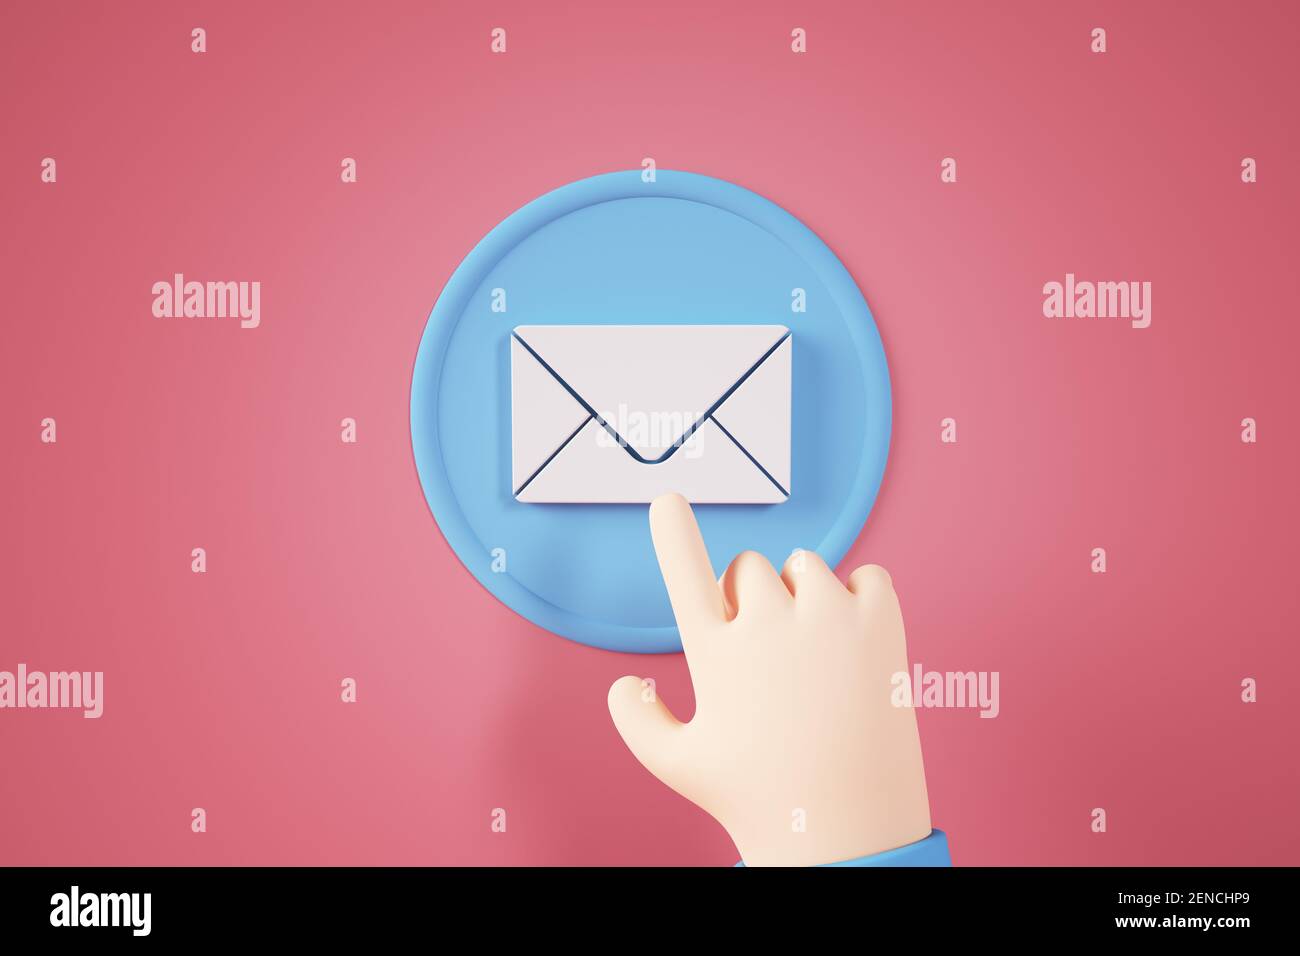 Mail contact button concept 3d rendering Stock Photo